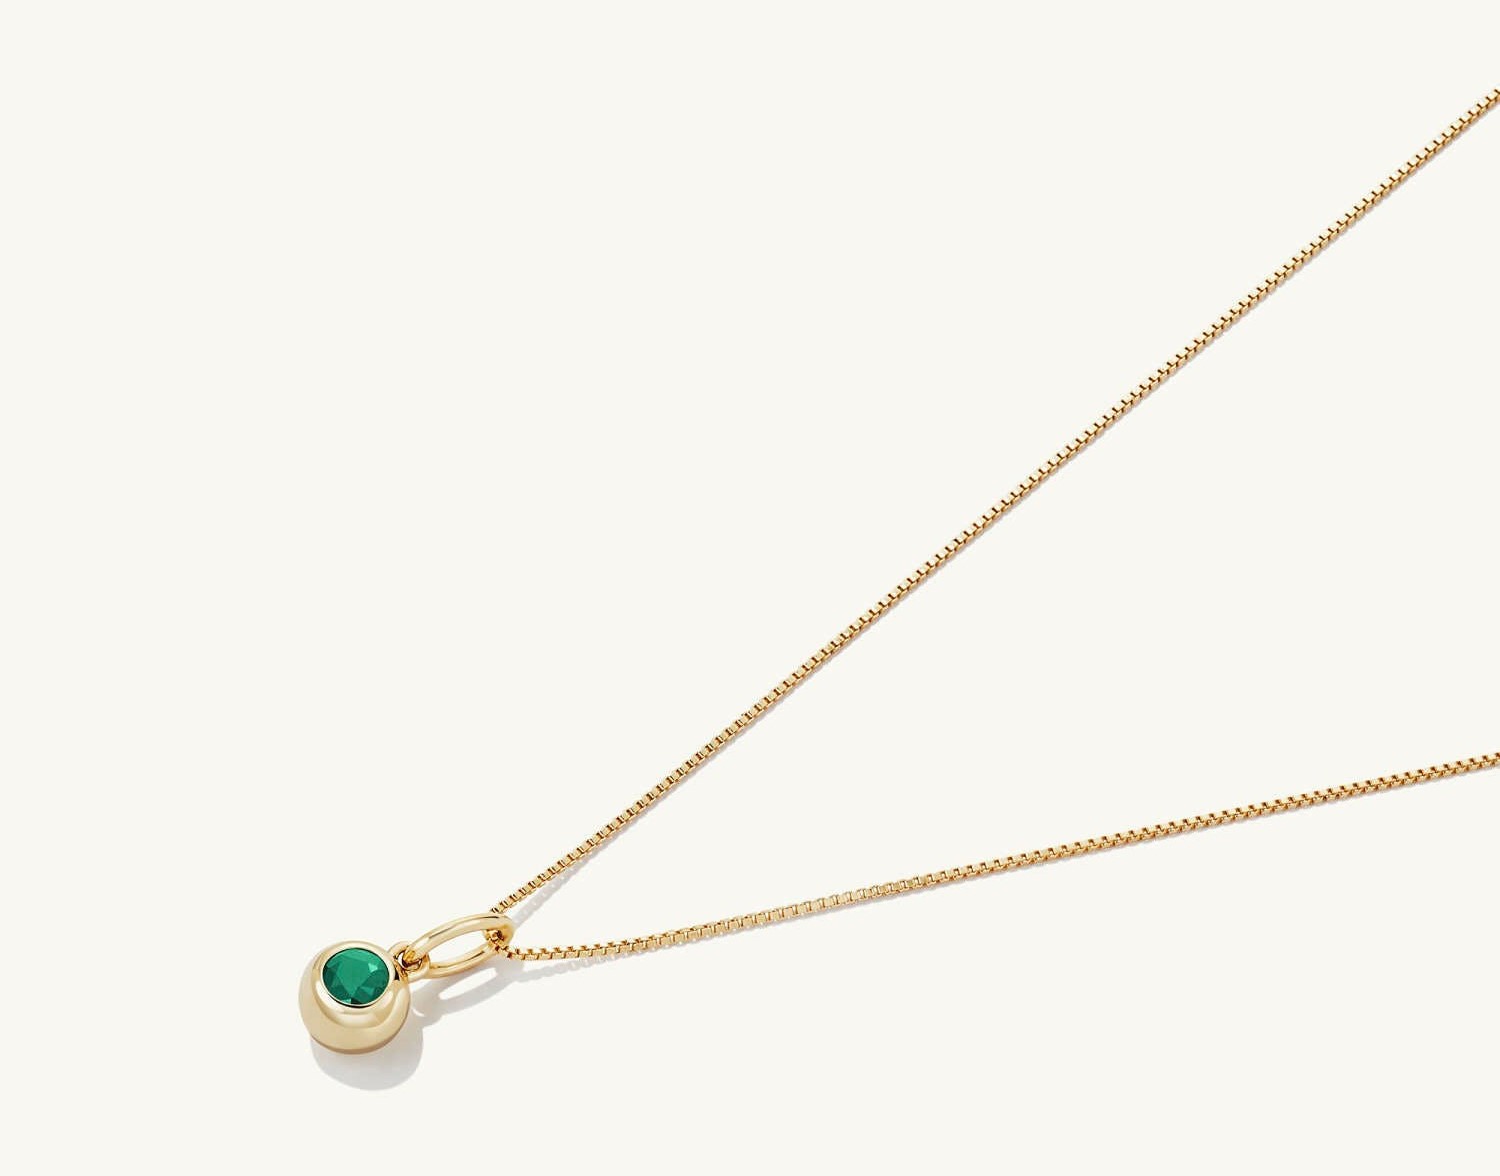 Emerald jewelry designs for May - August